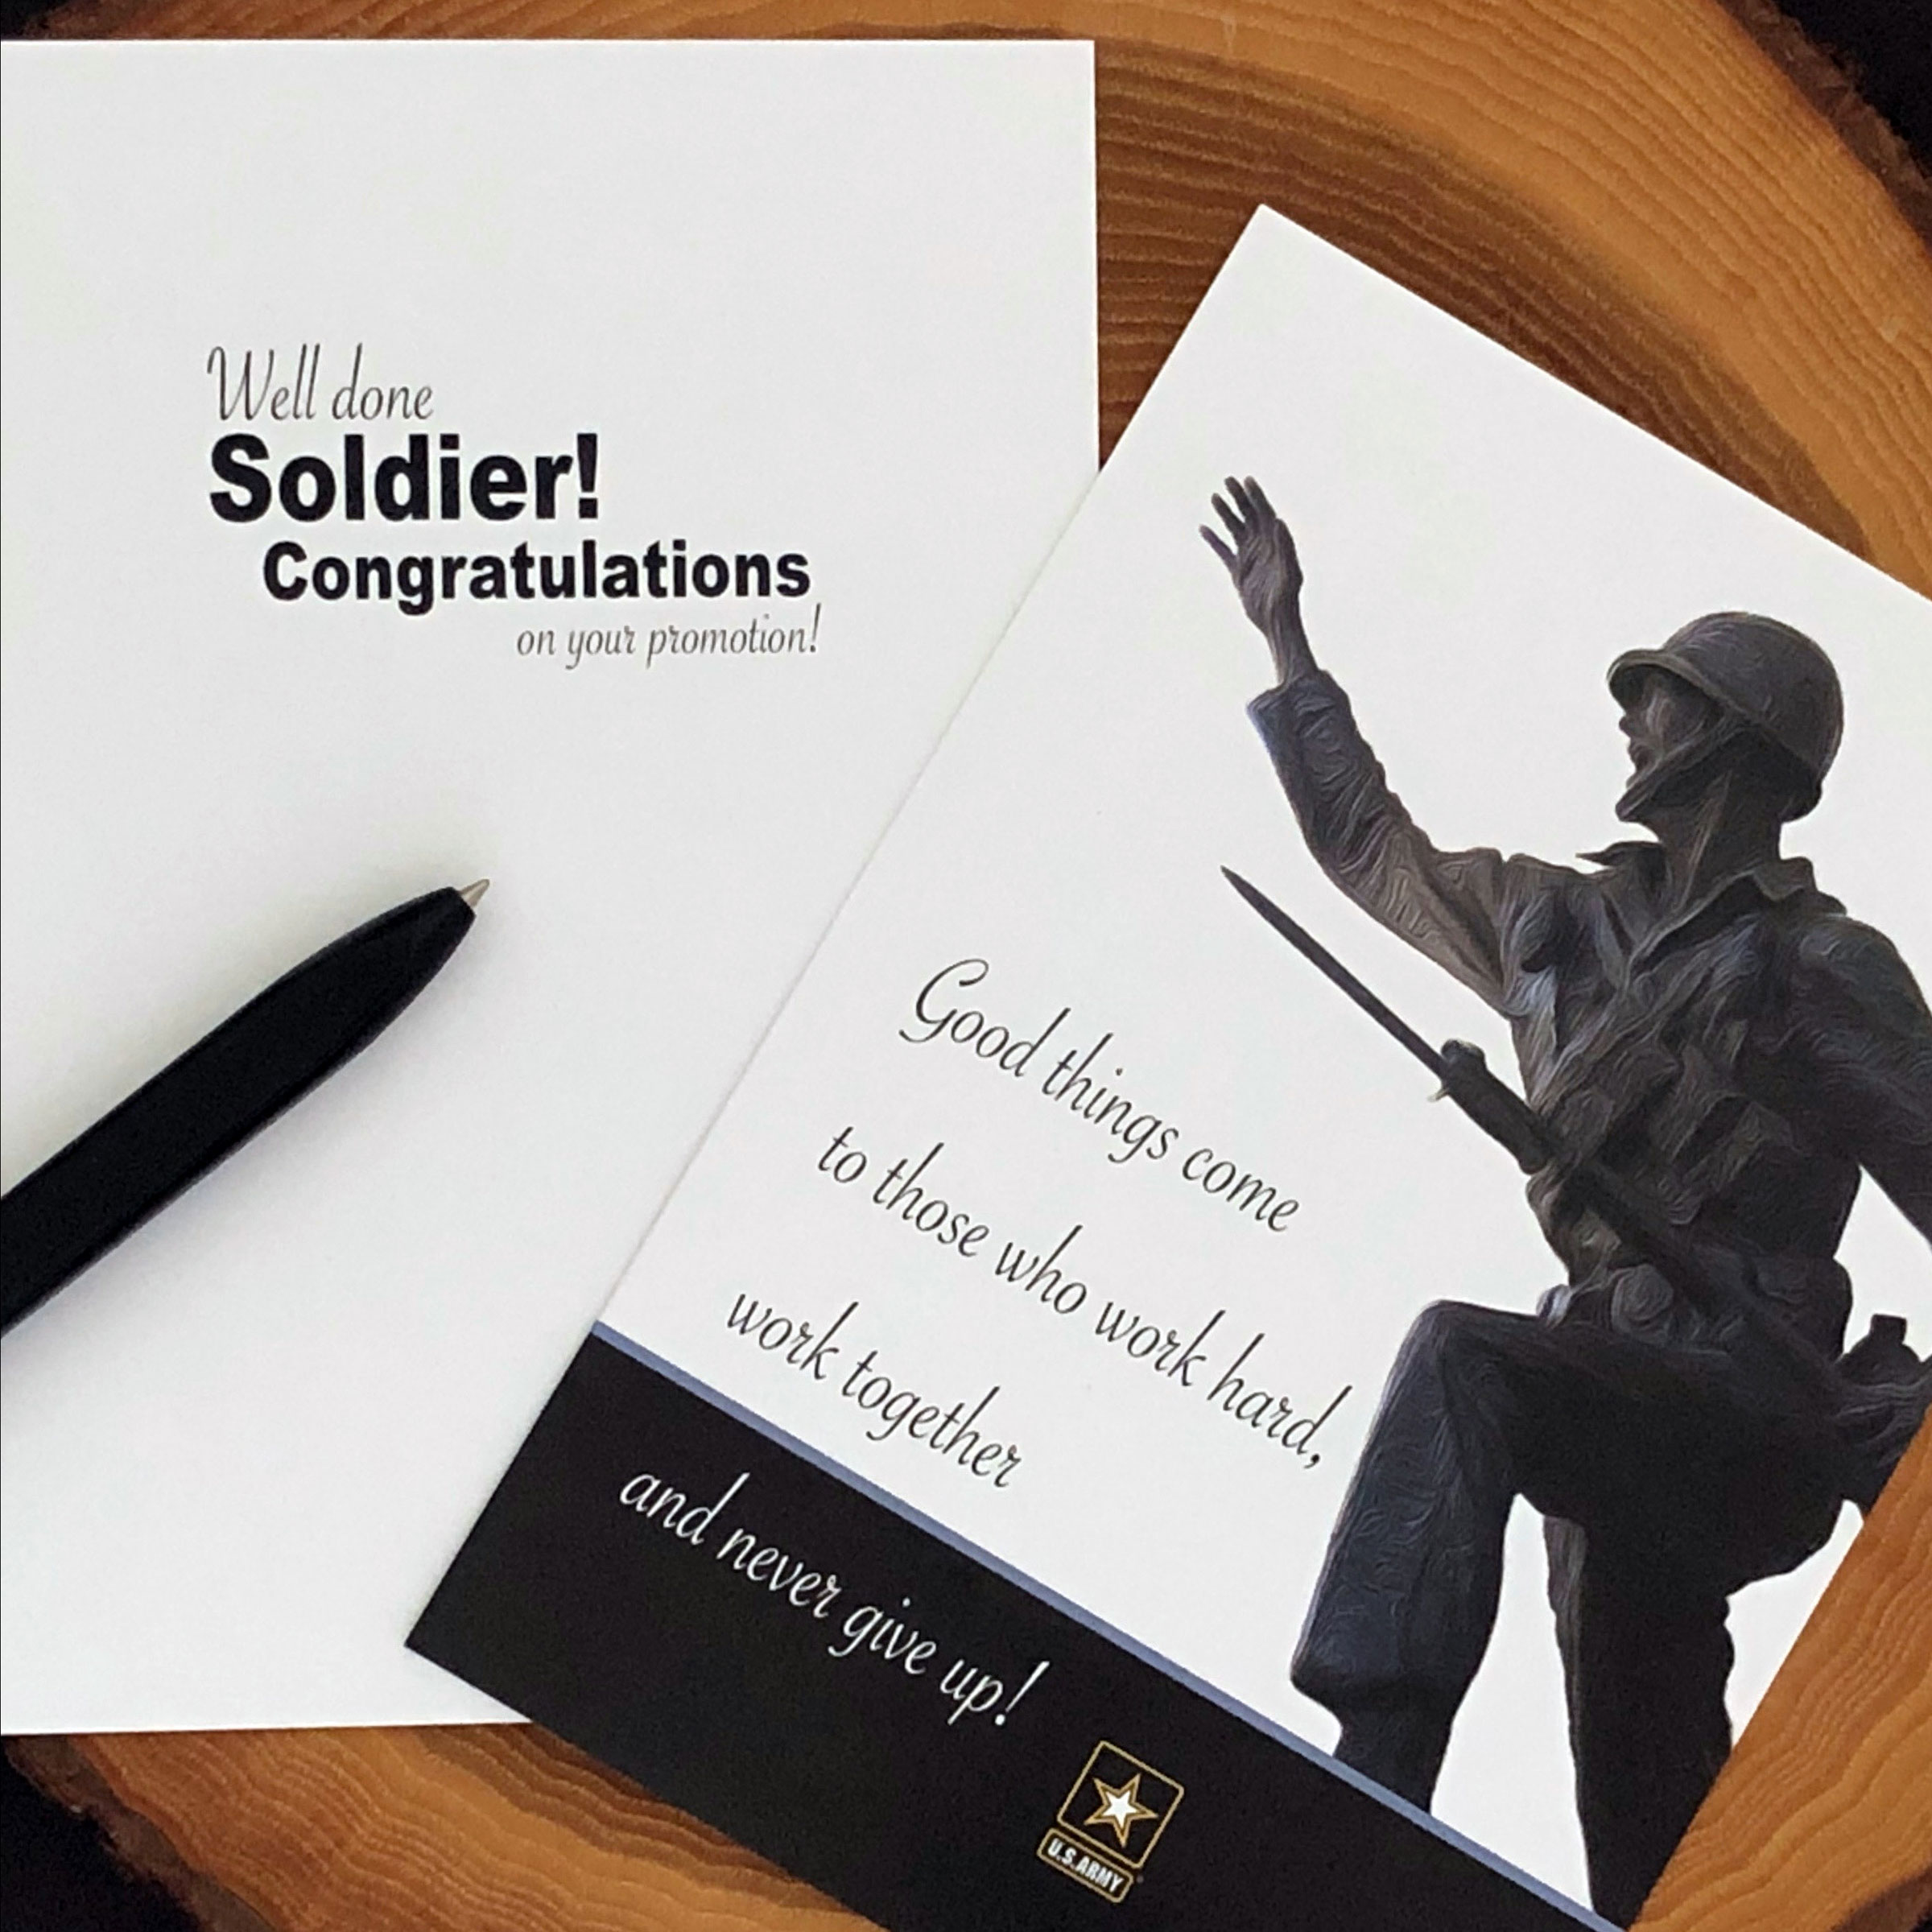 US Army Military Congratulations Greeting Card With Envelope 5 x 7” 2MyHero Work Hard